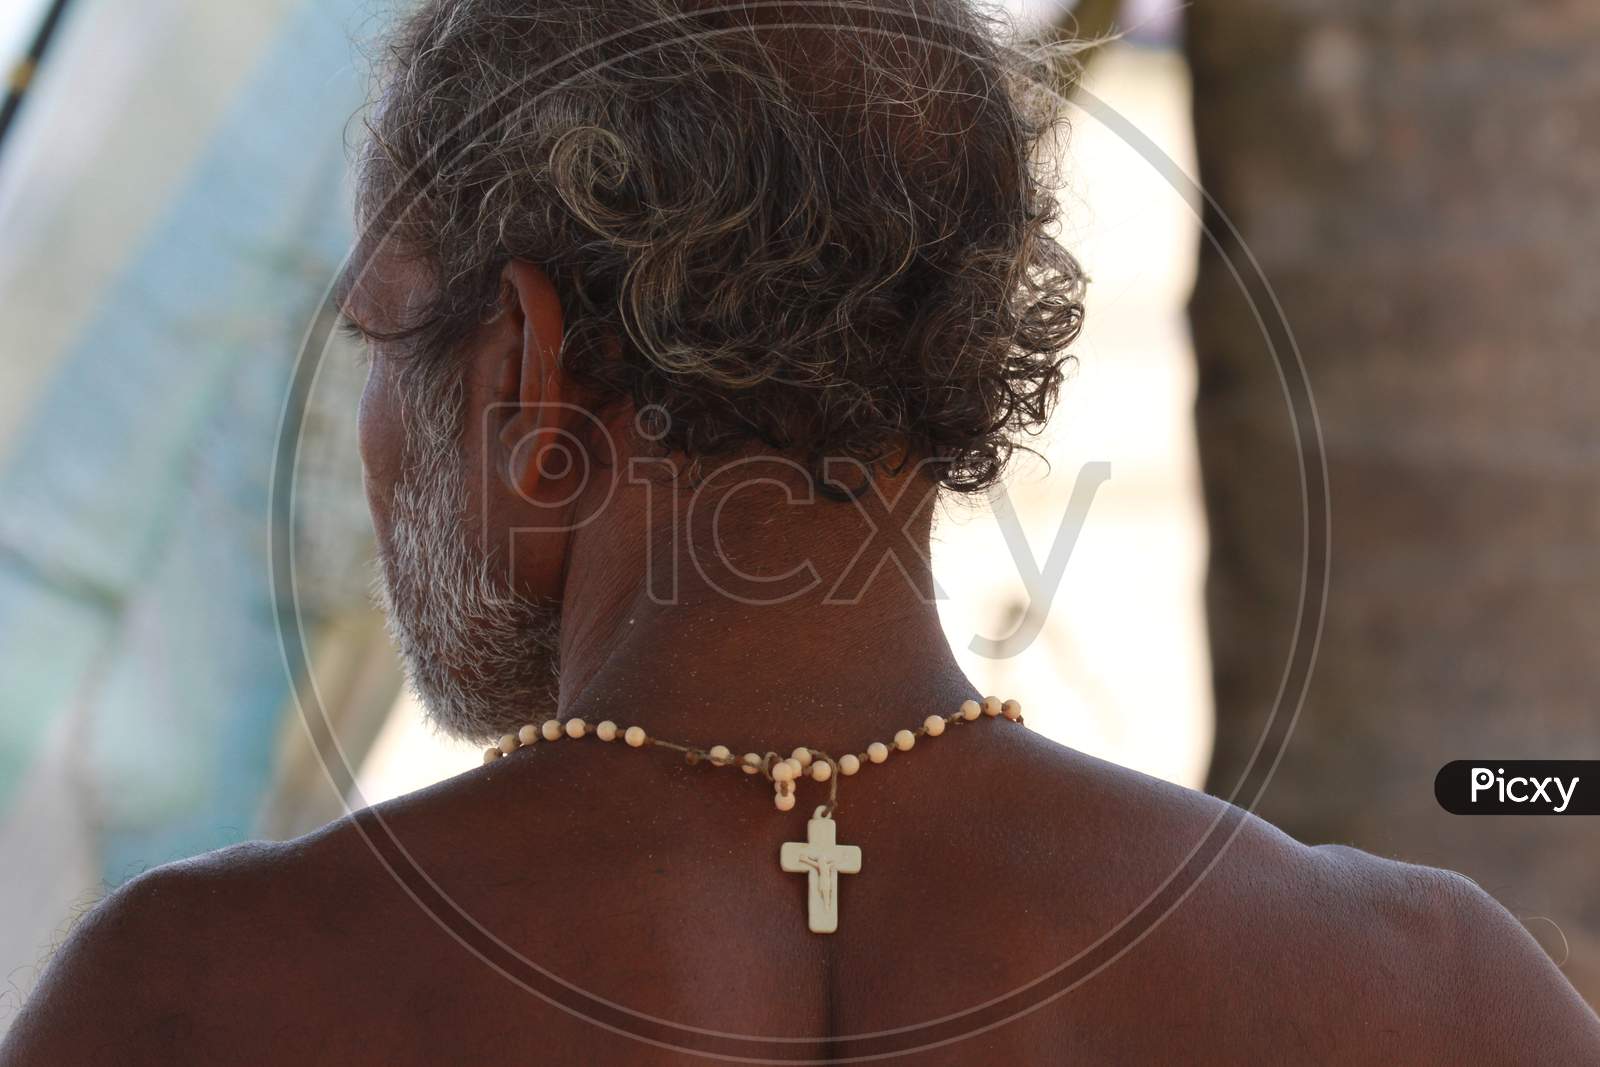 A Fisher Man Wearing a Christ  Chain In Kerala